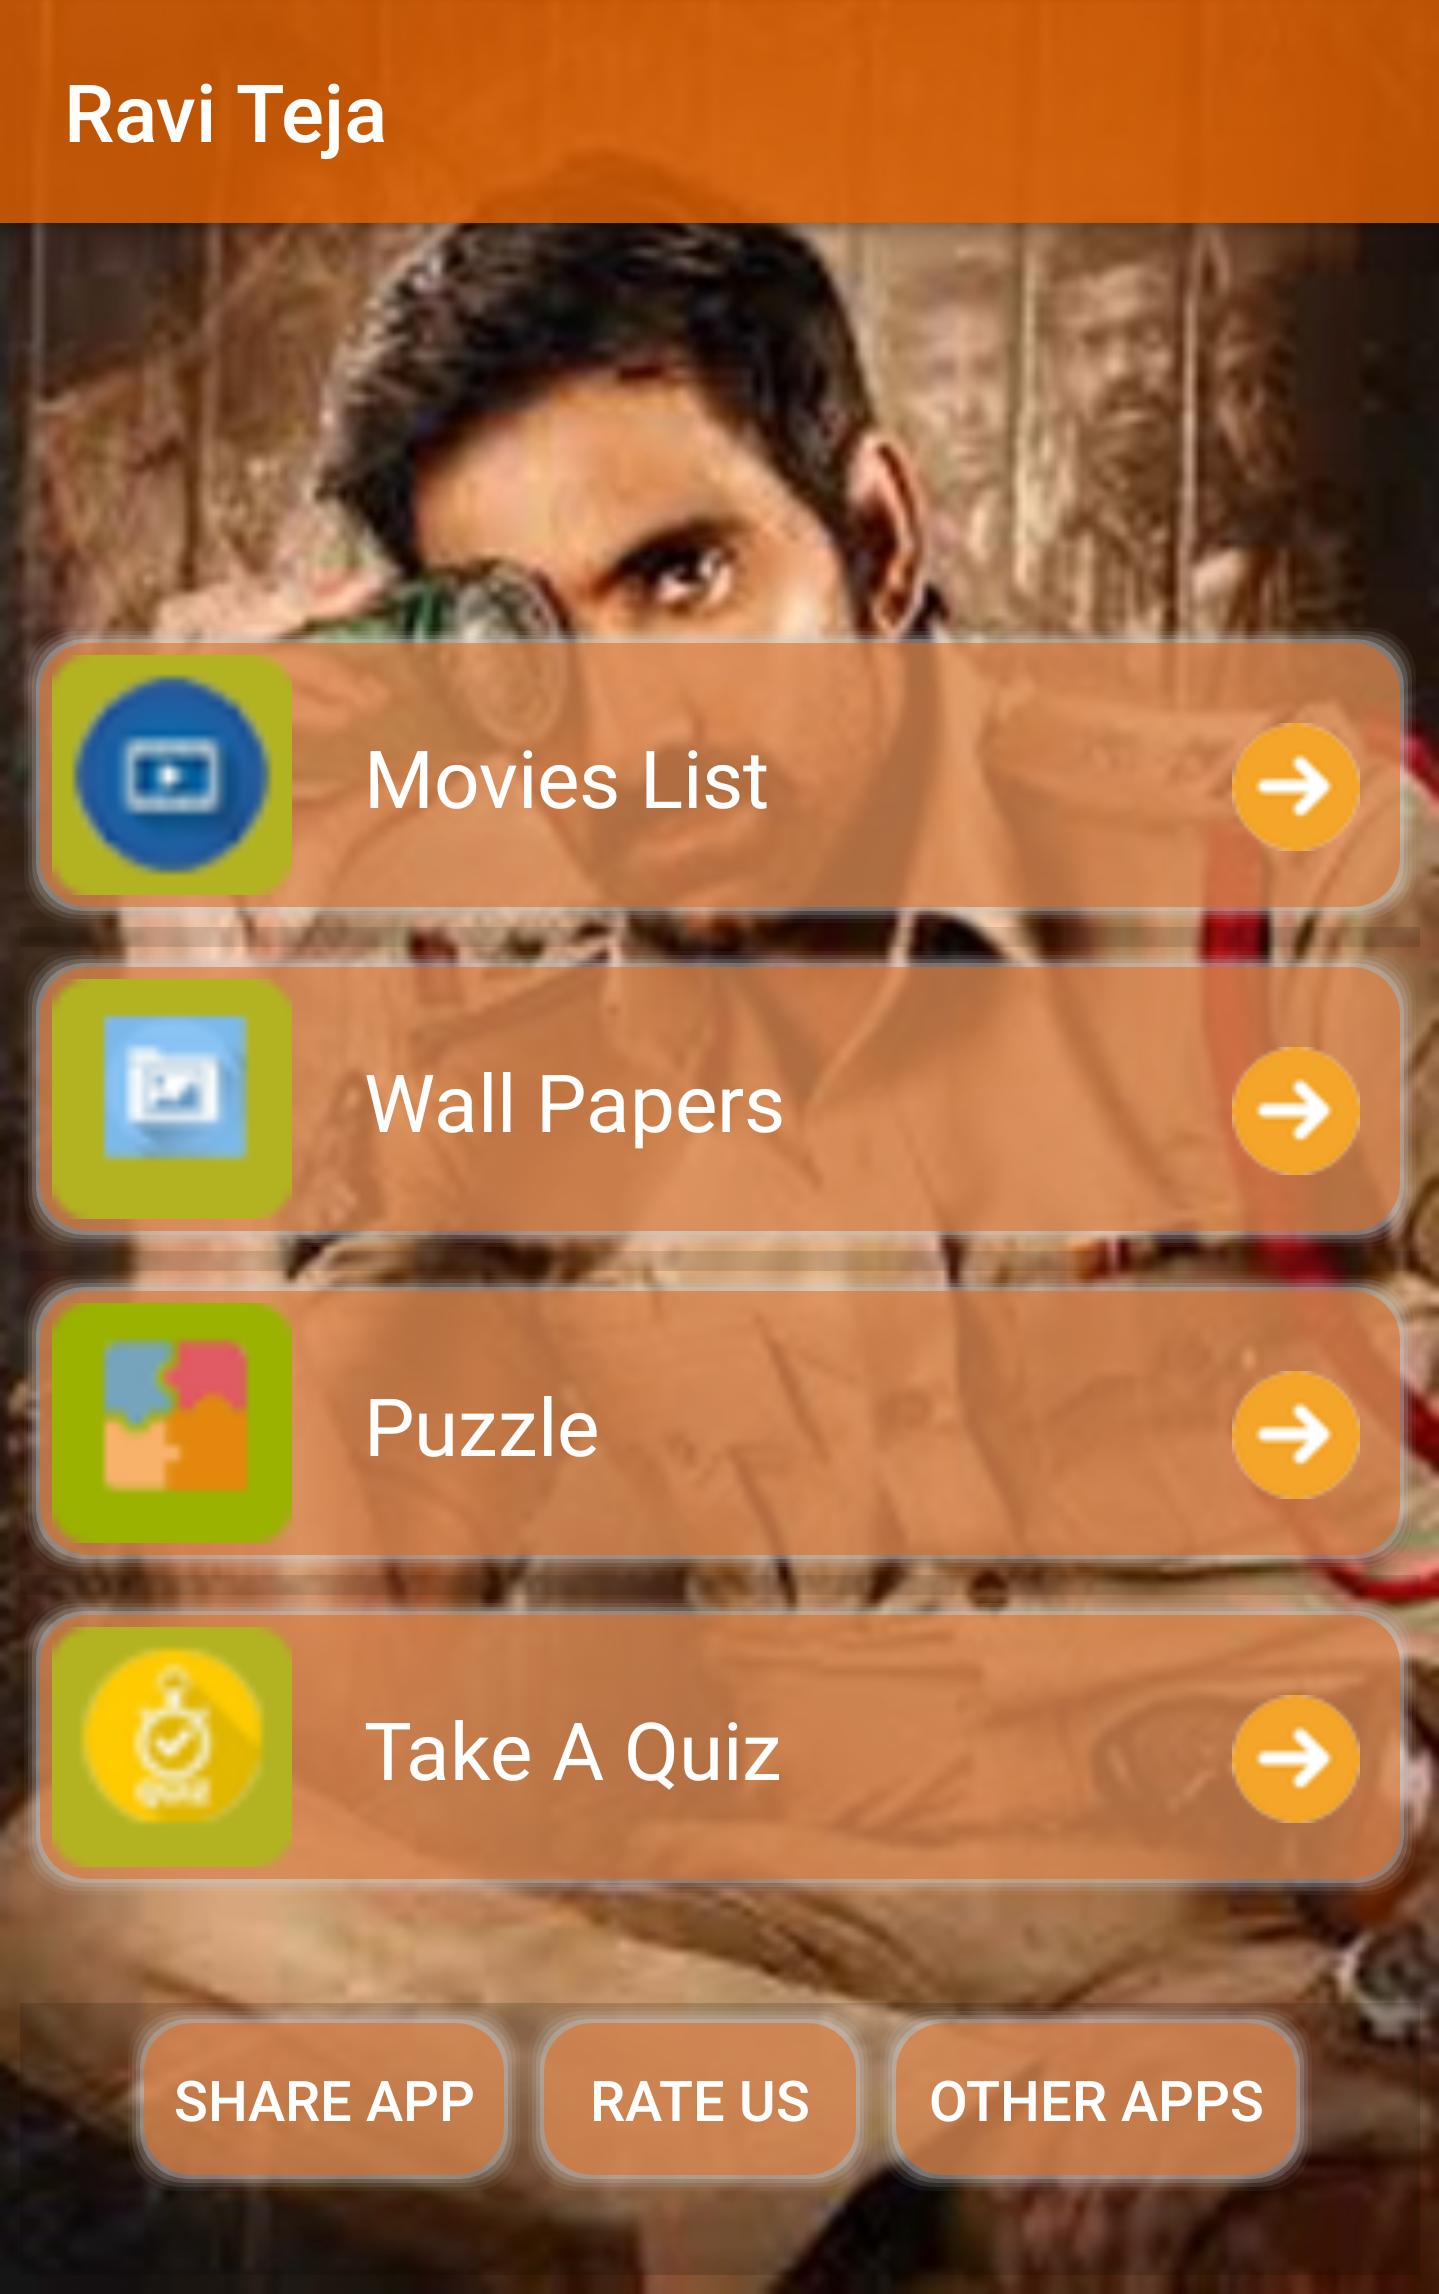 Raviteja Movies List,Wallpapers,puzzle,quiz for Android - APK Download